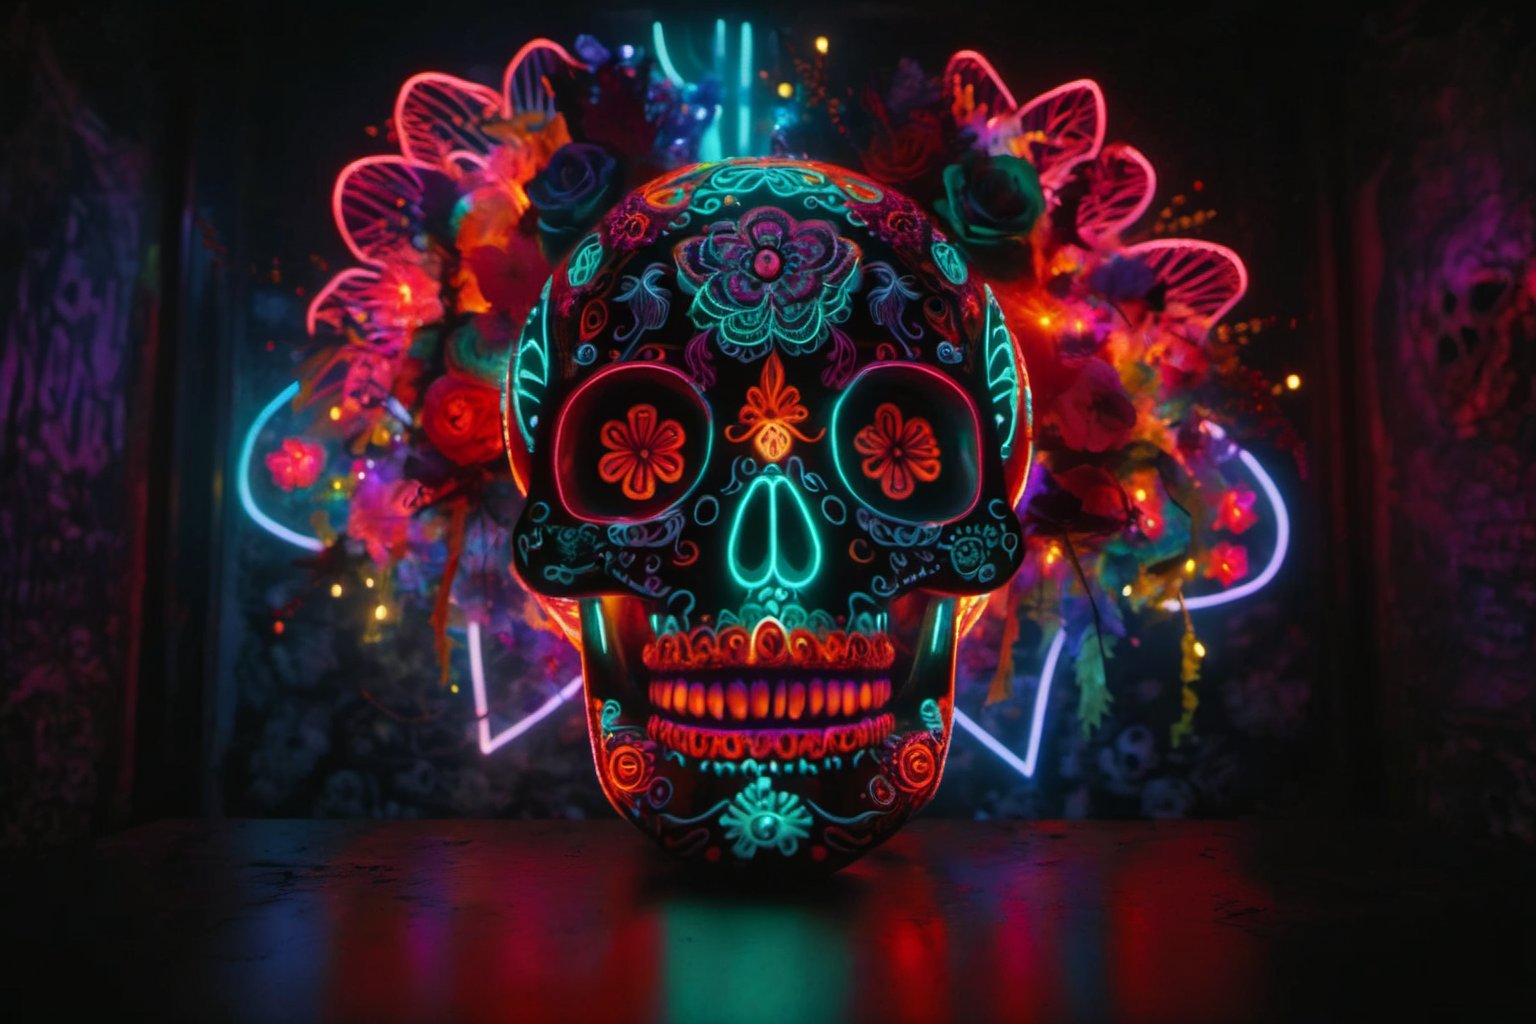 "Photo of a vibrantly decorated sugar skull, illuminated by neon lights in a dark setting. The skull features intricate neon patterns and designs, glowing vividly in a dark room with an overall moody atmosphere.